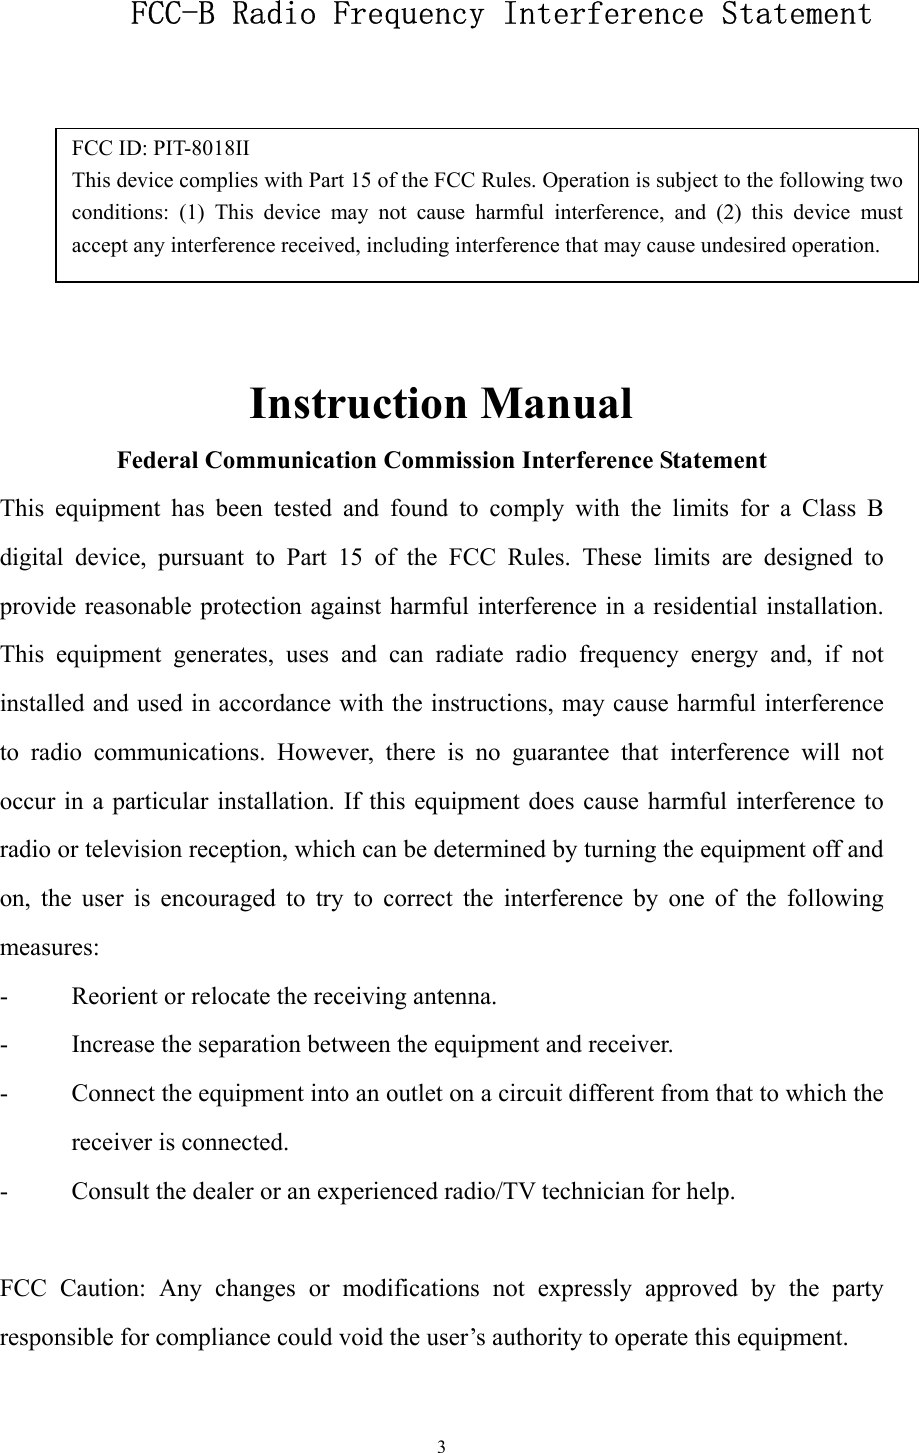  3FCC ID: PIT-8018II This device complies with Part 15 of the FCC Rules. Operation is subject to the following twoconditions: (1) This device may not cause harmful interference, and (2) this device mustaccept any interference received, including interference that may cause undesired operation.     FCC-B Radio Frequency Interference Statement       Instruction Manual Federal Communication Commission Interference Statement This equipment has been tested and found to comply with the limits for a Class B digital device, pursuant to Part 15 of the FCC Rules. These limits are designed to provide reasonable protection against harmful interference in a residential installation. This equipment generates, uses and can radiate radio frequency energy and, if not installed and used in accordance with the instructions, may cause harmful interference to radio communications. However, there is no guarantee that interference will not occur in a particular installation. If this equipment does cause harmful interference to radio or television reception, which can be determined by turning the equipment off and on, the user is encouraged to try to correct the interference by one of the following measures: -  Reorient or relocate the receiving antenna. -  Increase the separation between the equipment and receiver. -  Connect the equipment into an outlet on a circuit different from that to which the receiver is connected. -  Consult the dealer or an experienced radio/TV technician for help.  FCC Caution: Any changes or modifications not expressly approved by the party responsible for compliance could void the user’s authority to operate this equipment.  